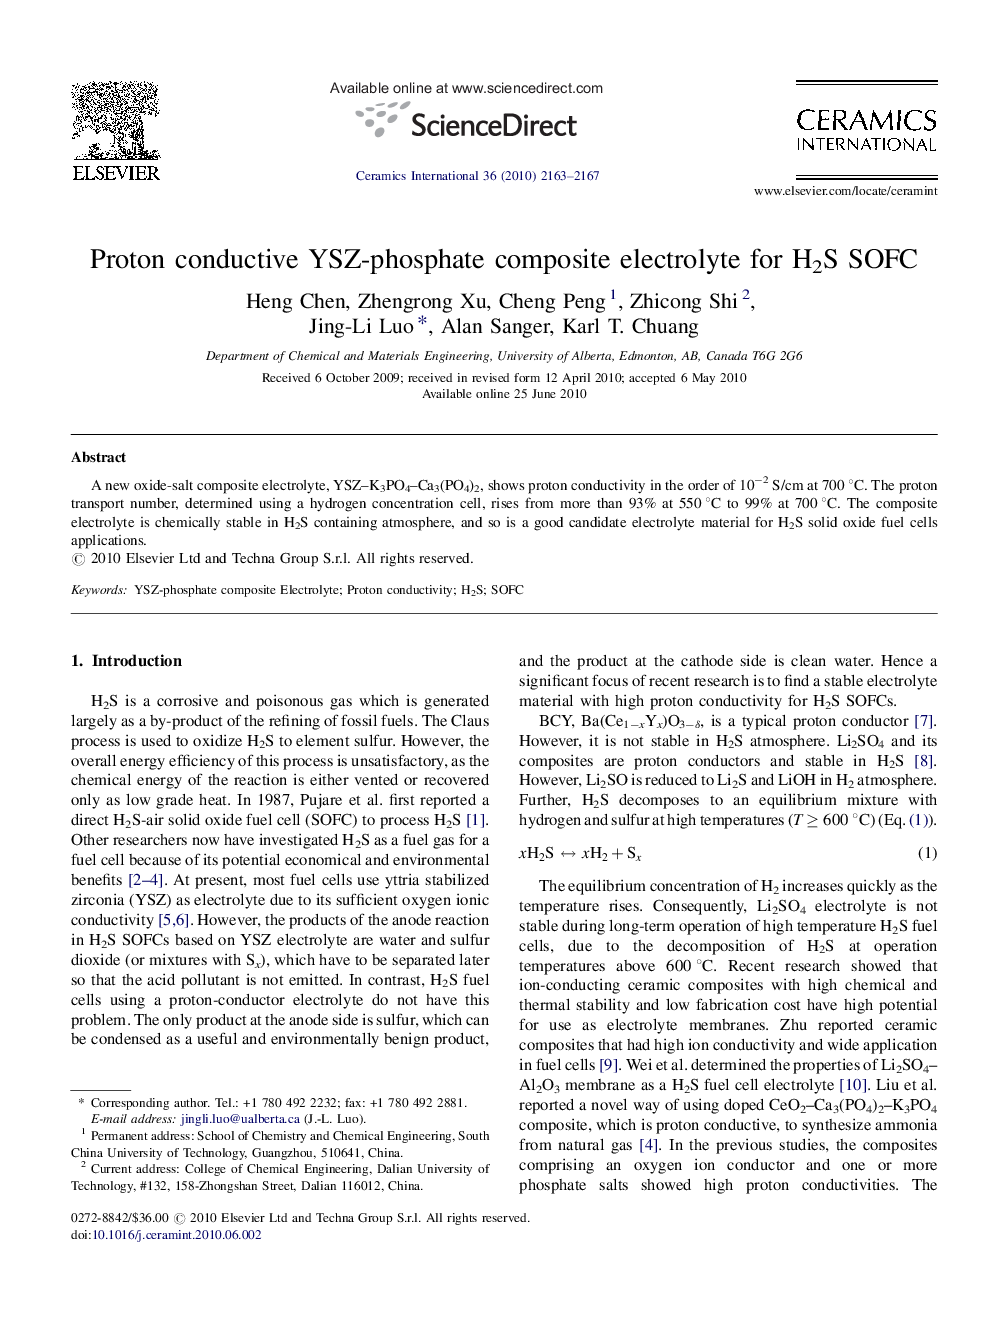 Proton conductive YSZ-phosphate composite electrolyte for H2S SOFC